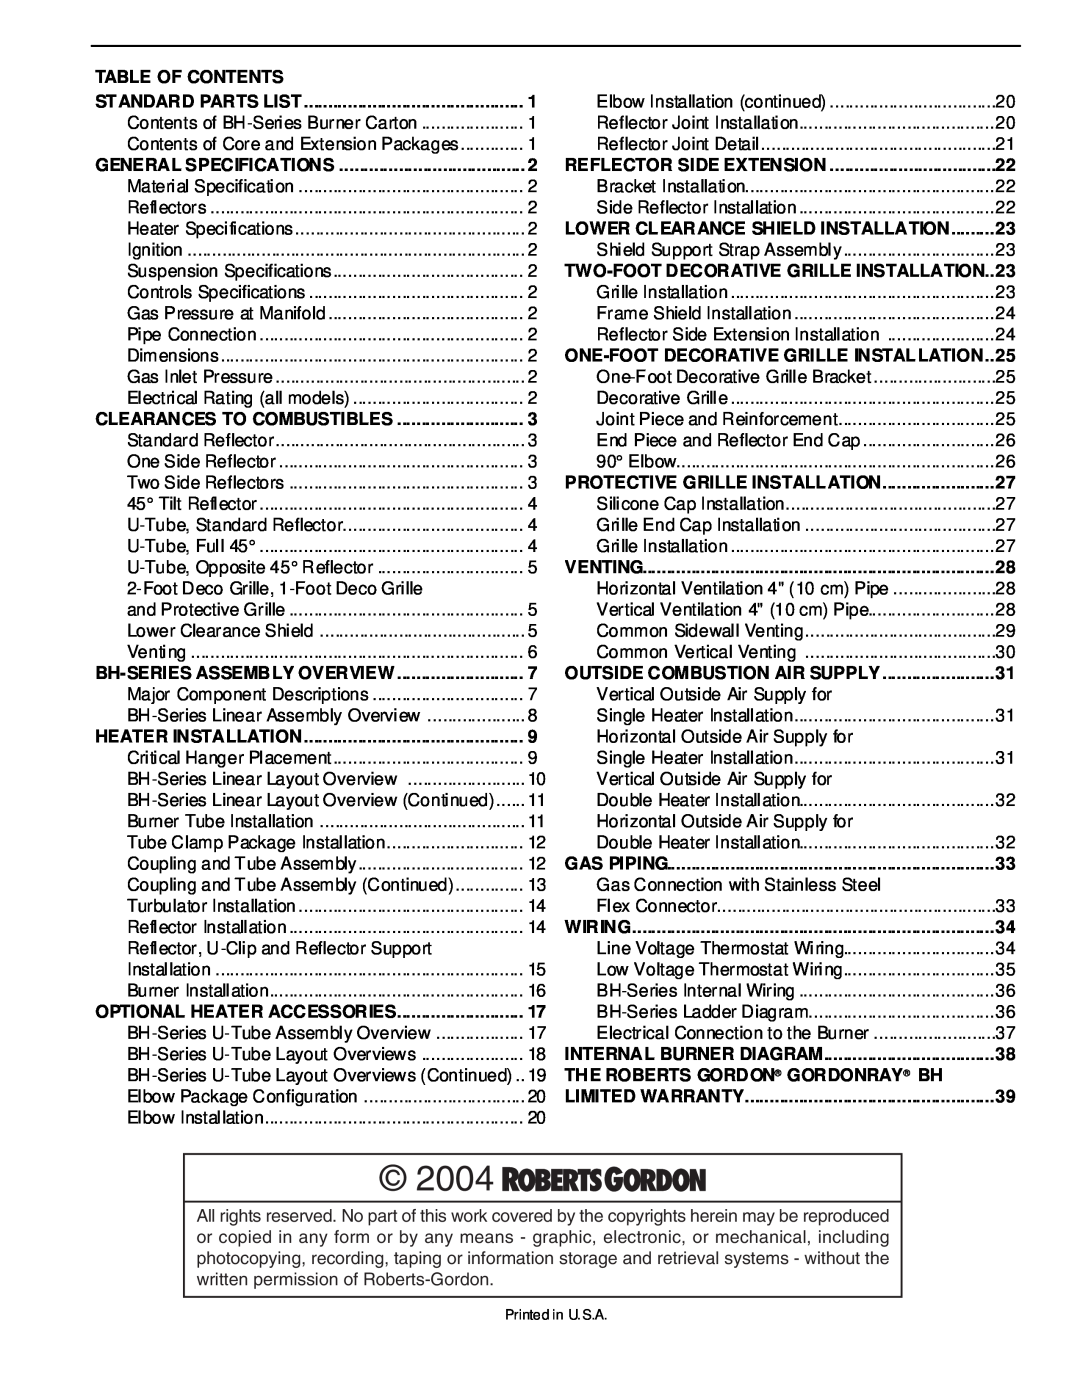 Roberts Gorden BH Series service manual 2004, Table Of Contents 